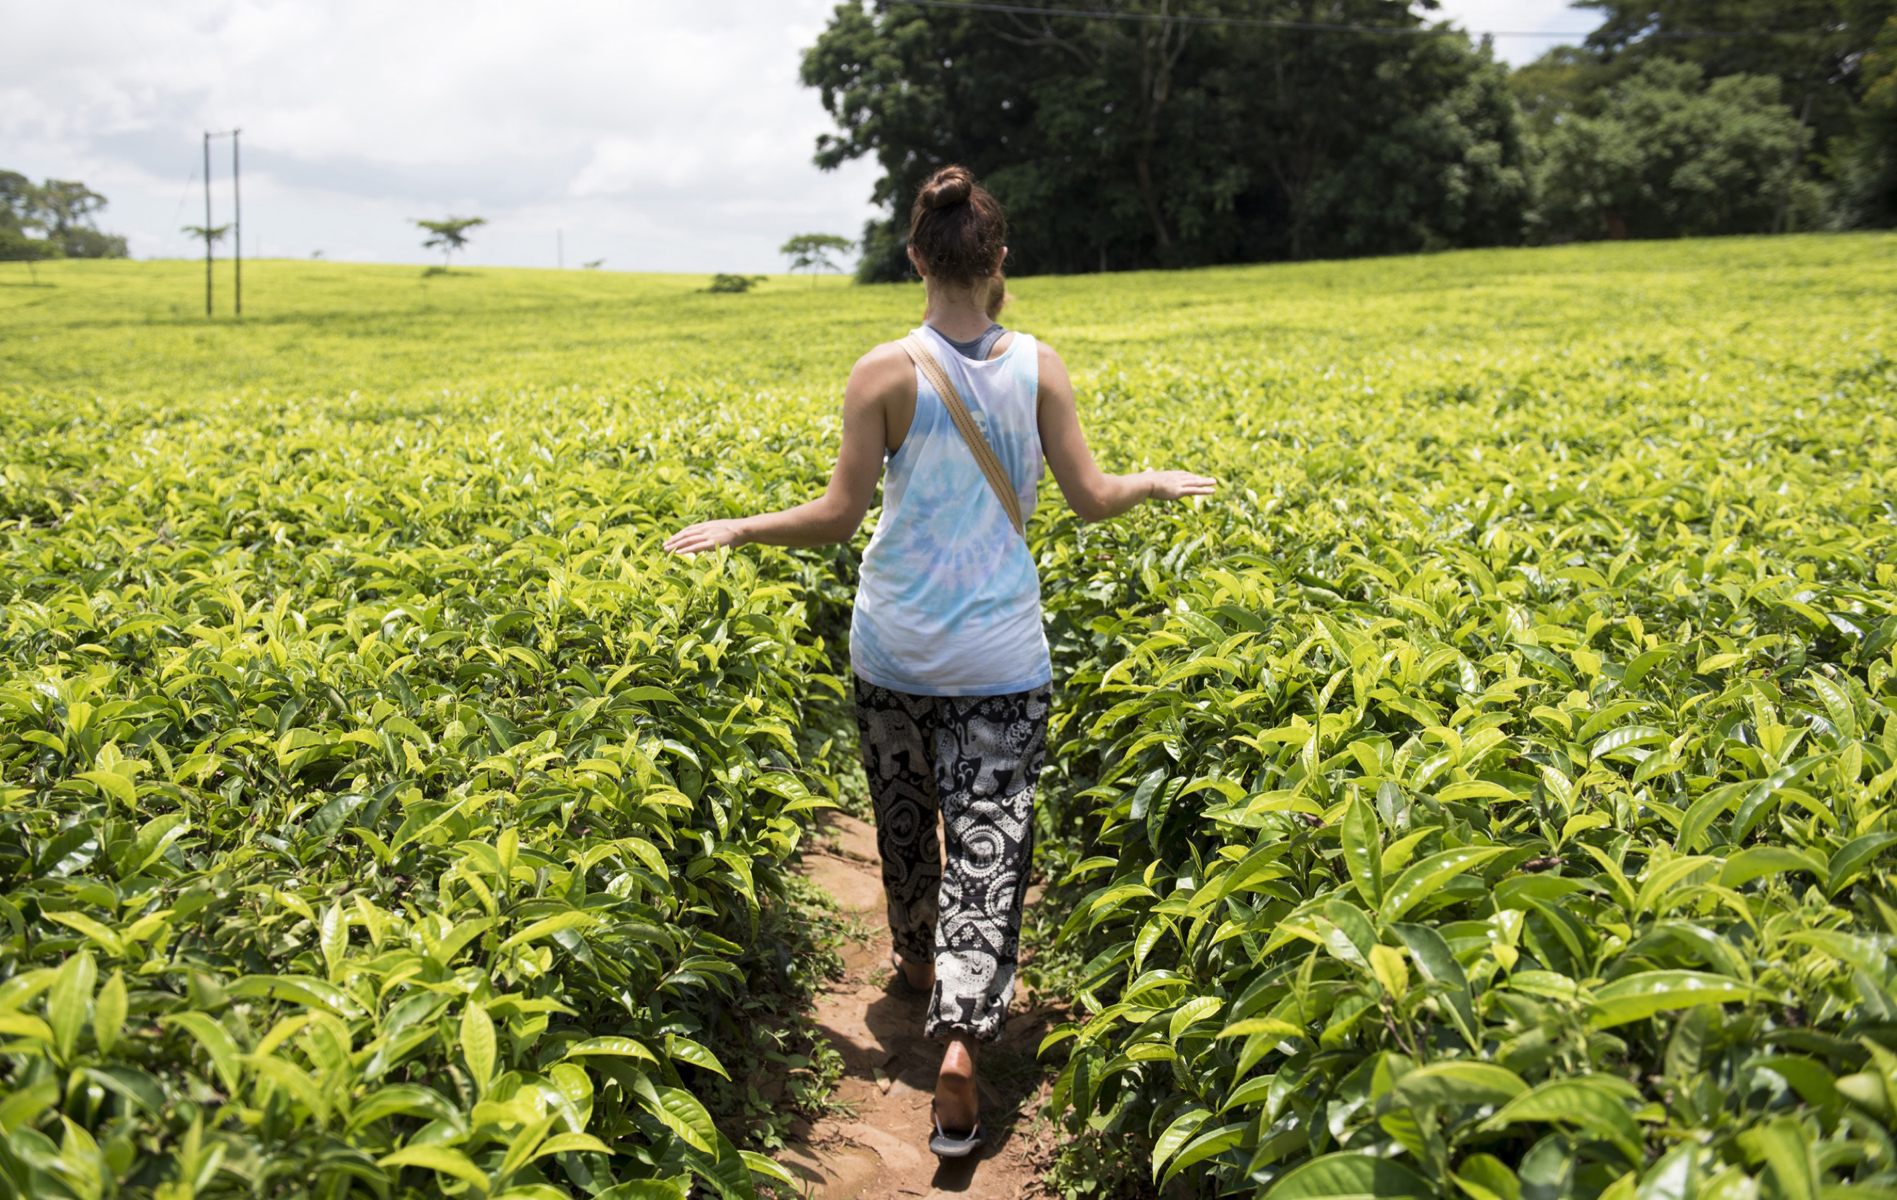 During a final outing before leaving Malawi, the group visits the Satemwa Tea Plantation in Thyolo. Tea is an important crop in Malawi, second to tobacco. 